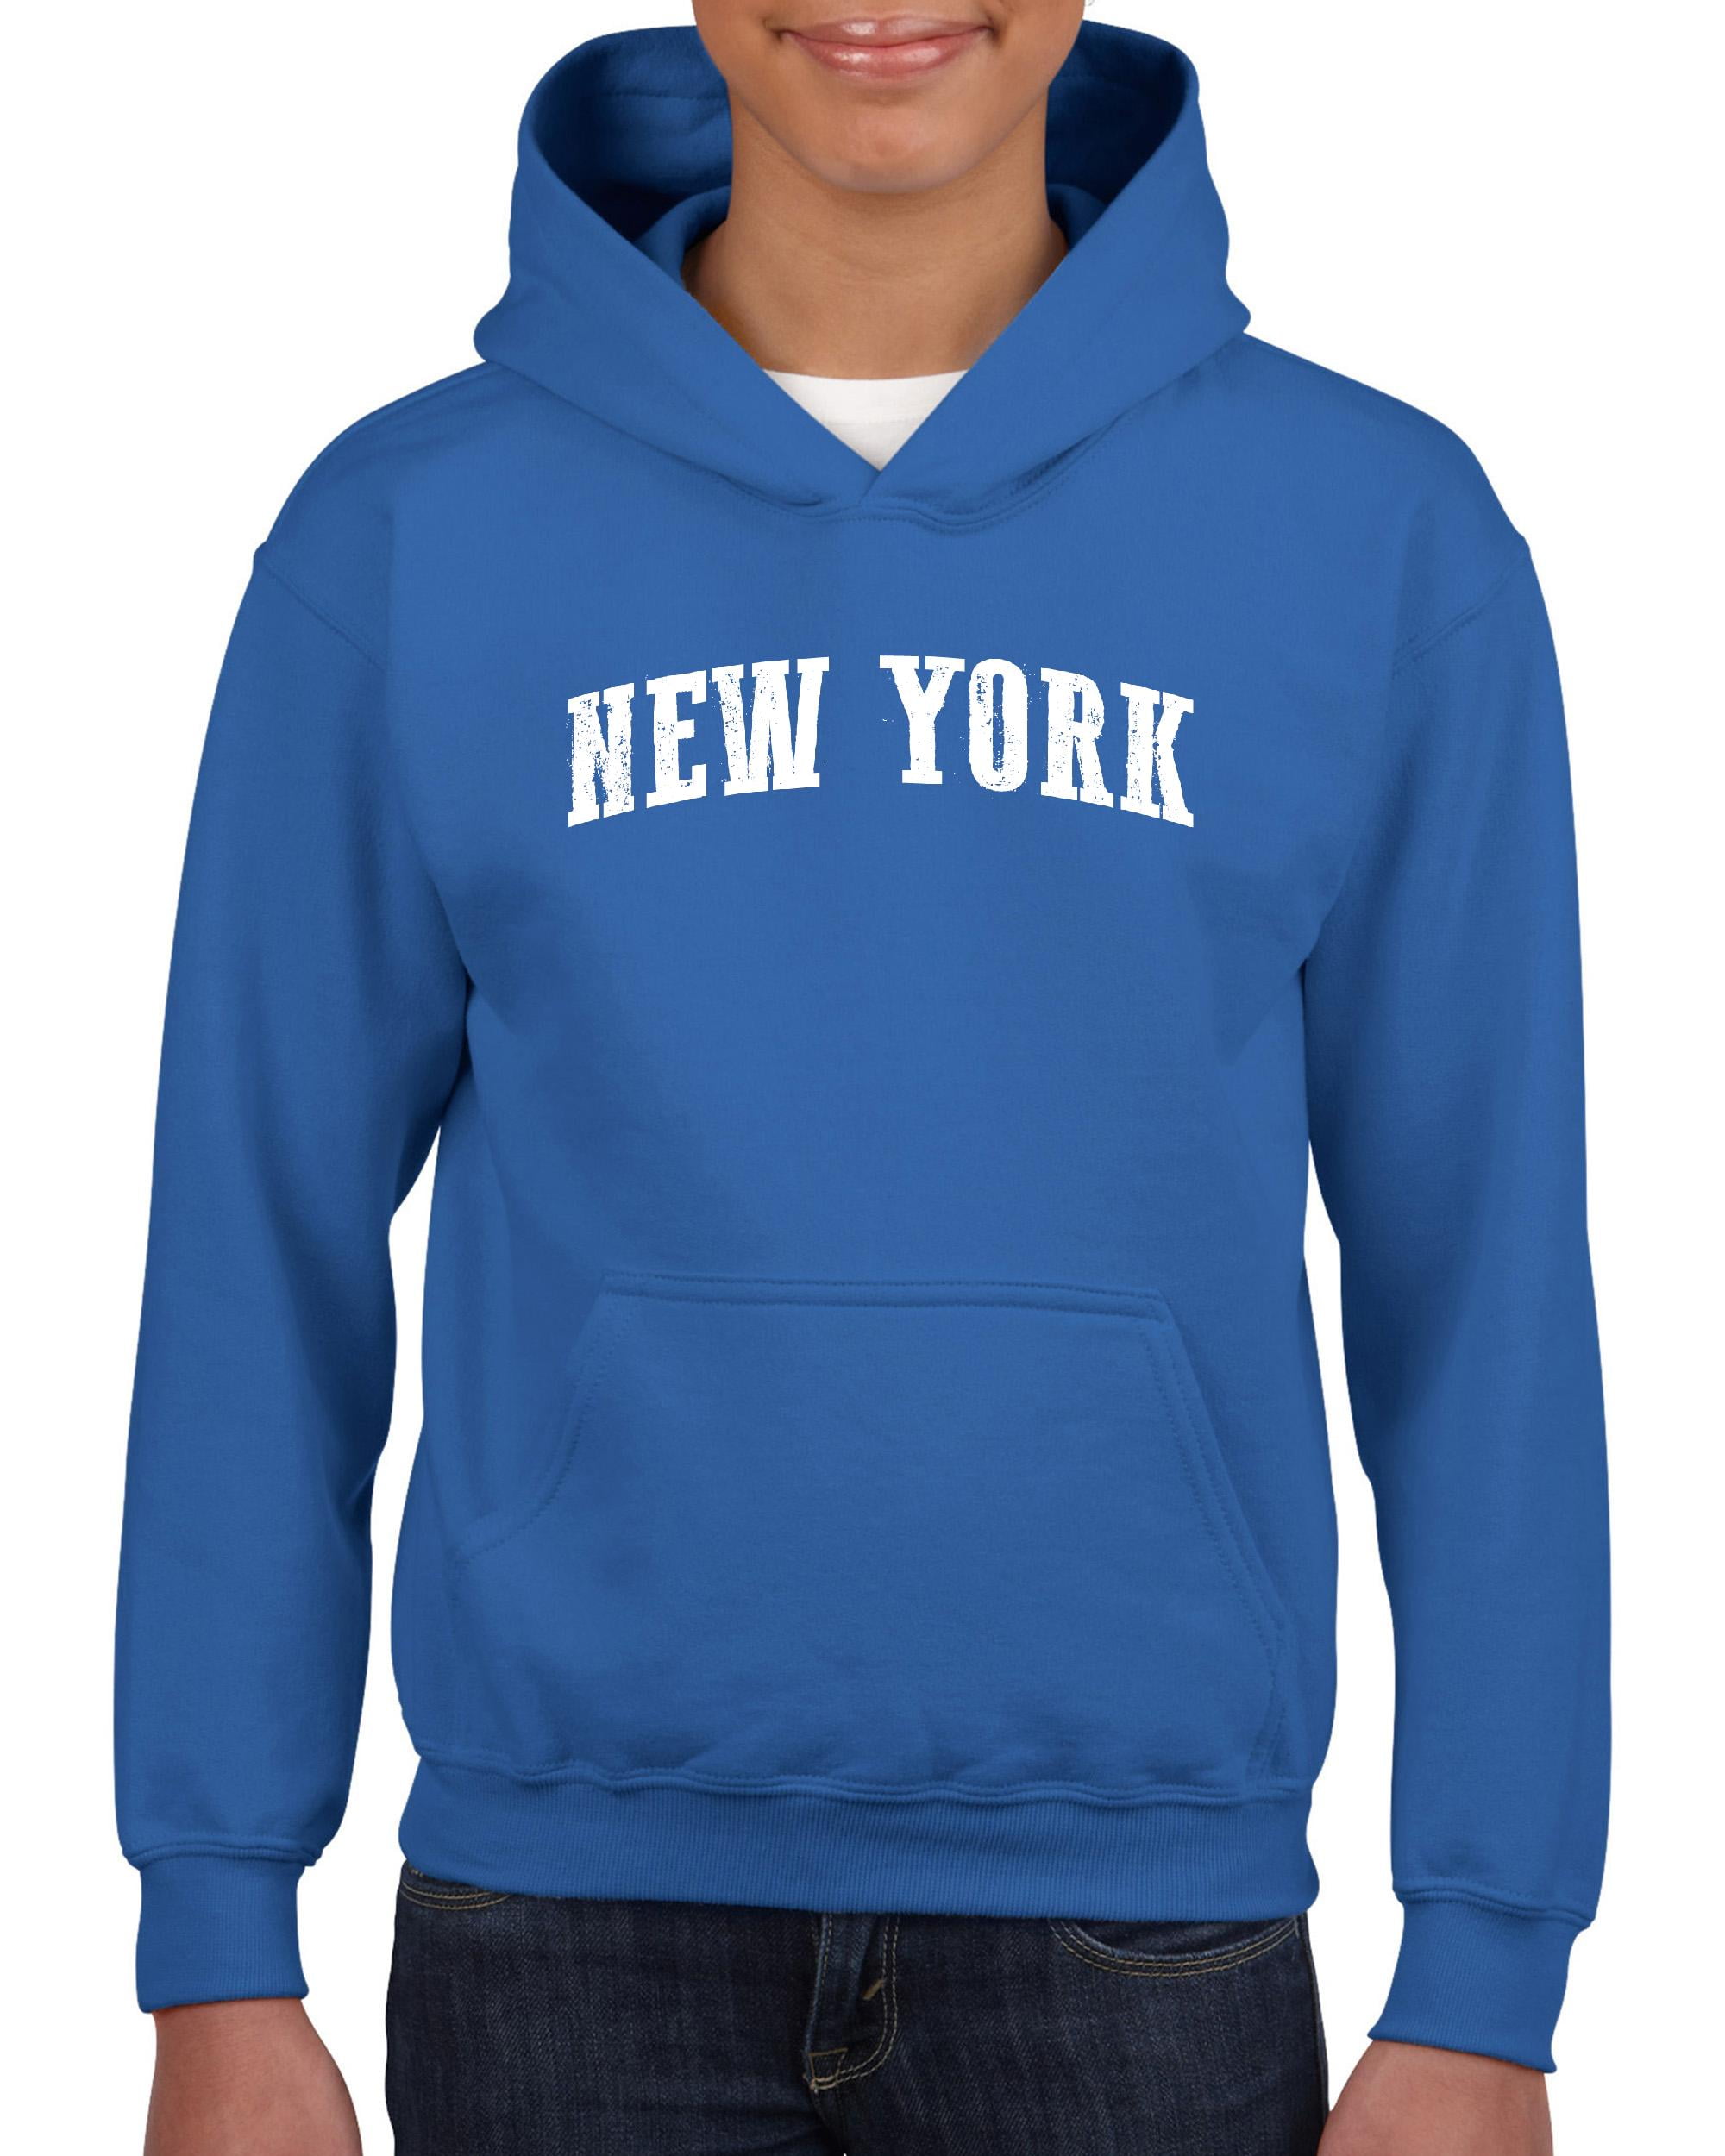 NYC Underground Microplush Zip Front Hooded Onesie on sale at shophq.com -  755-546